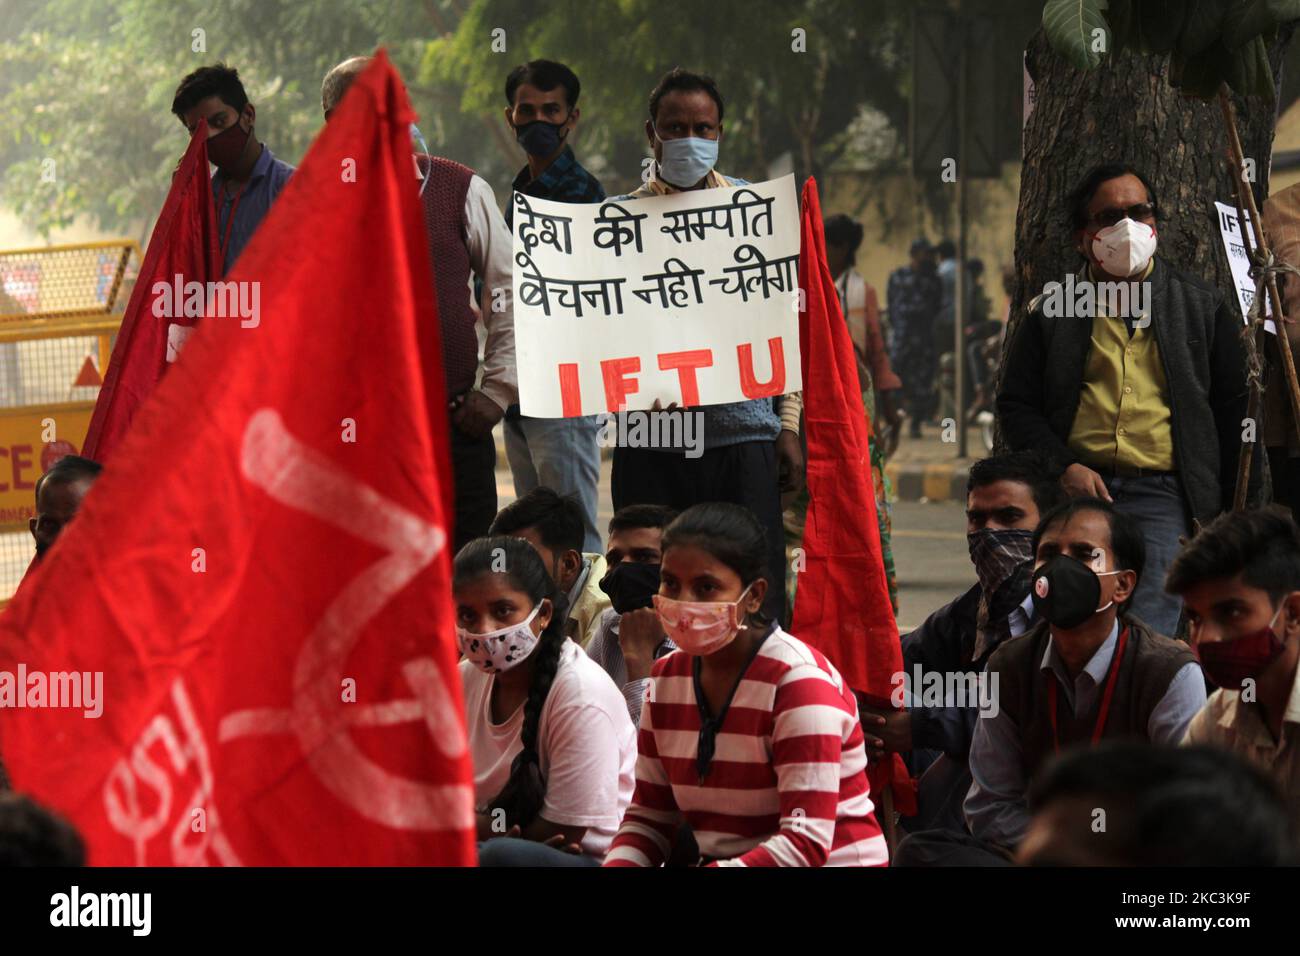 Demonstrators from Left Trade Unions holding placards protest against recent changes in labour laws introduced by Narendra Modi led Central govt, at Jantar Mantar on November 8, 2020 in New Delhi, India. The Industrial Relations Code (IR Code, 2020) allows businesses with up to 300 workers to retrench and close establishments without government approval. The earlier limit was 100 employees. (Photo by Mayank Makhija/NurPhoto) Stock Photo